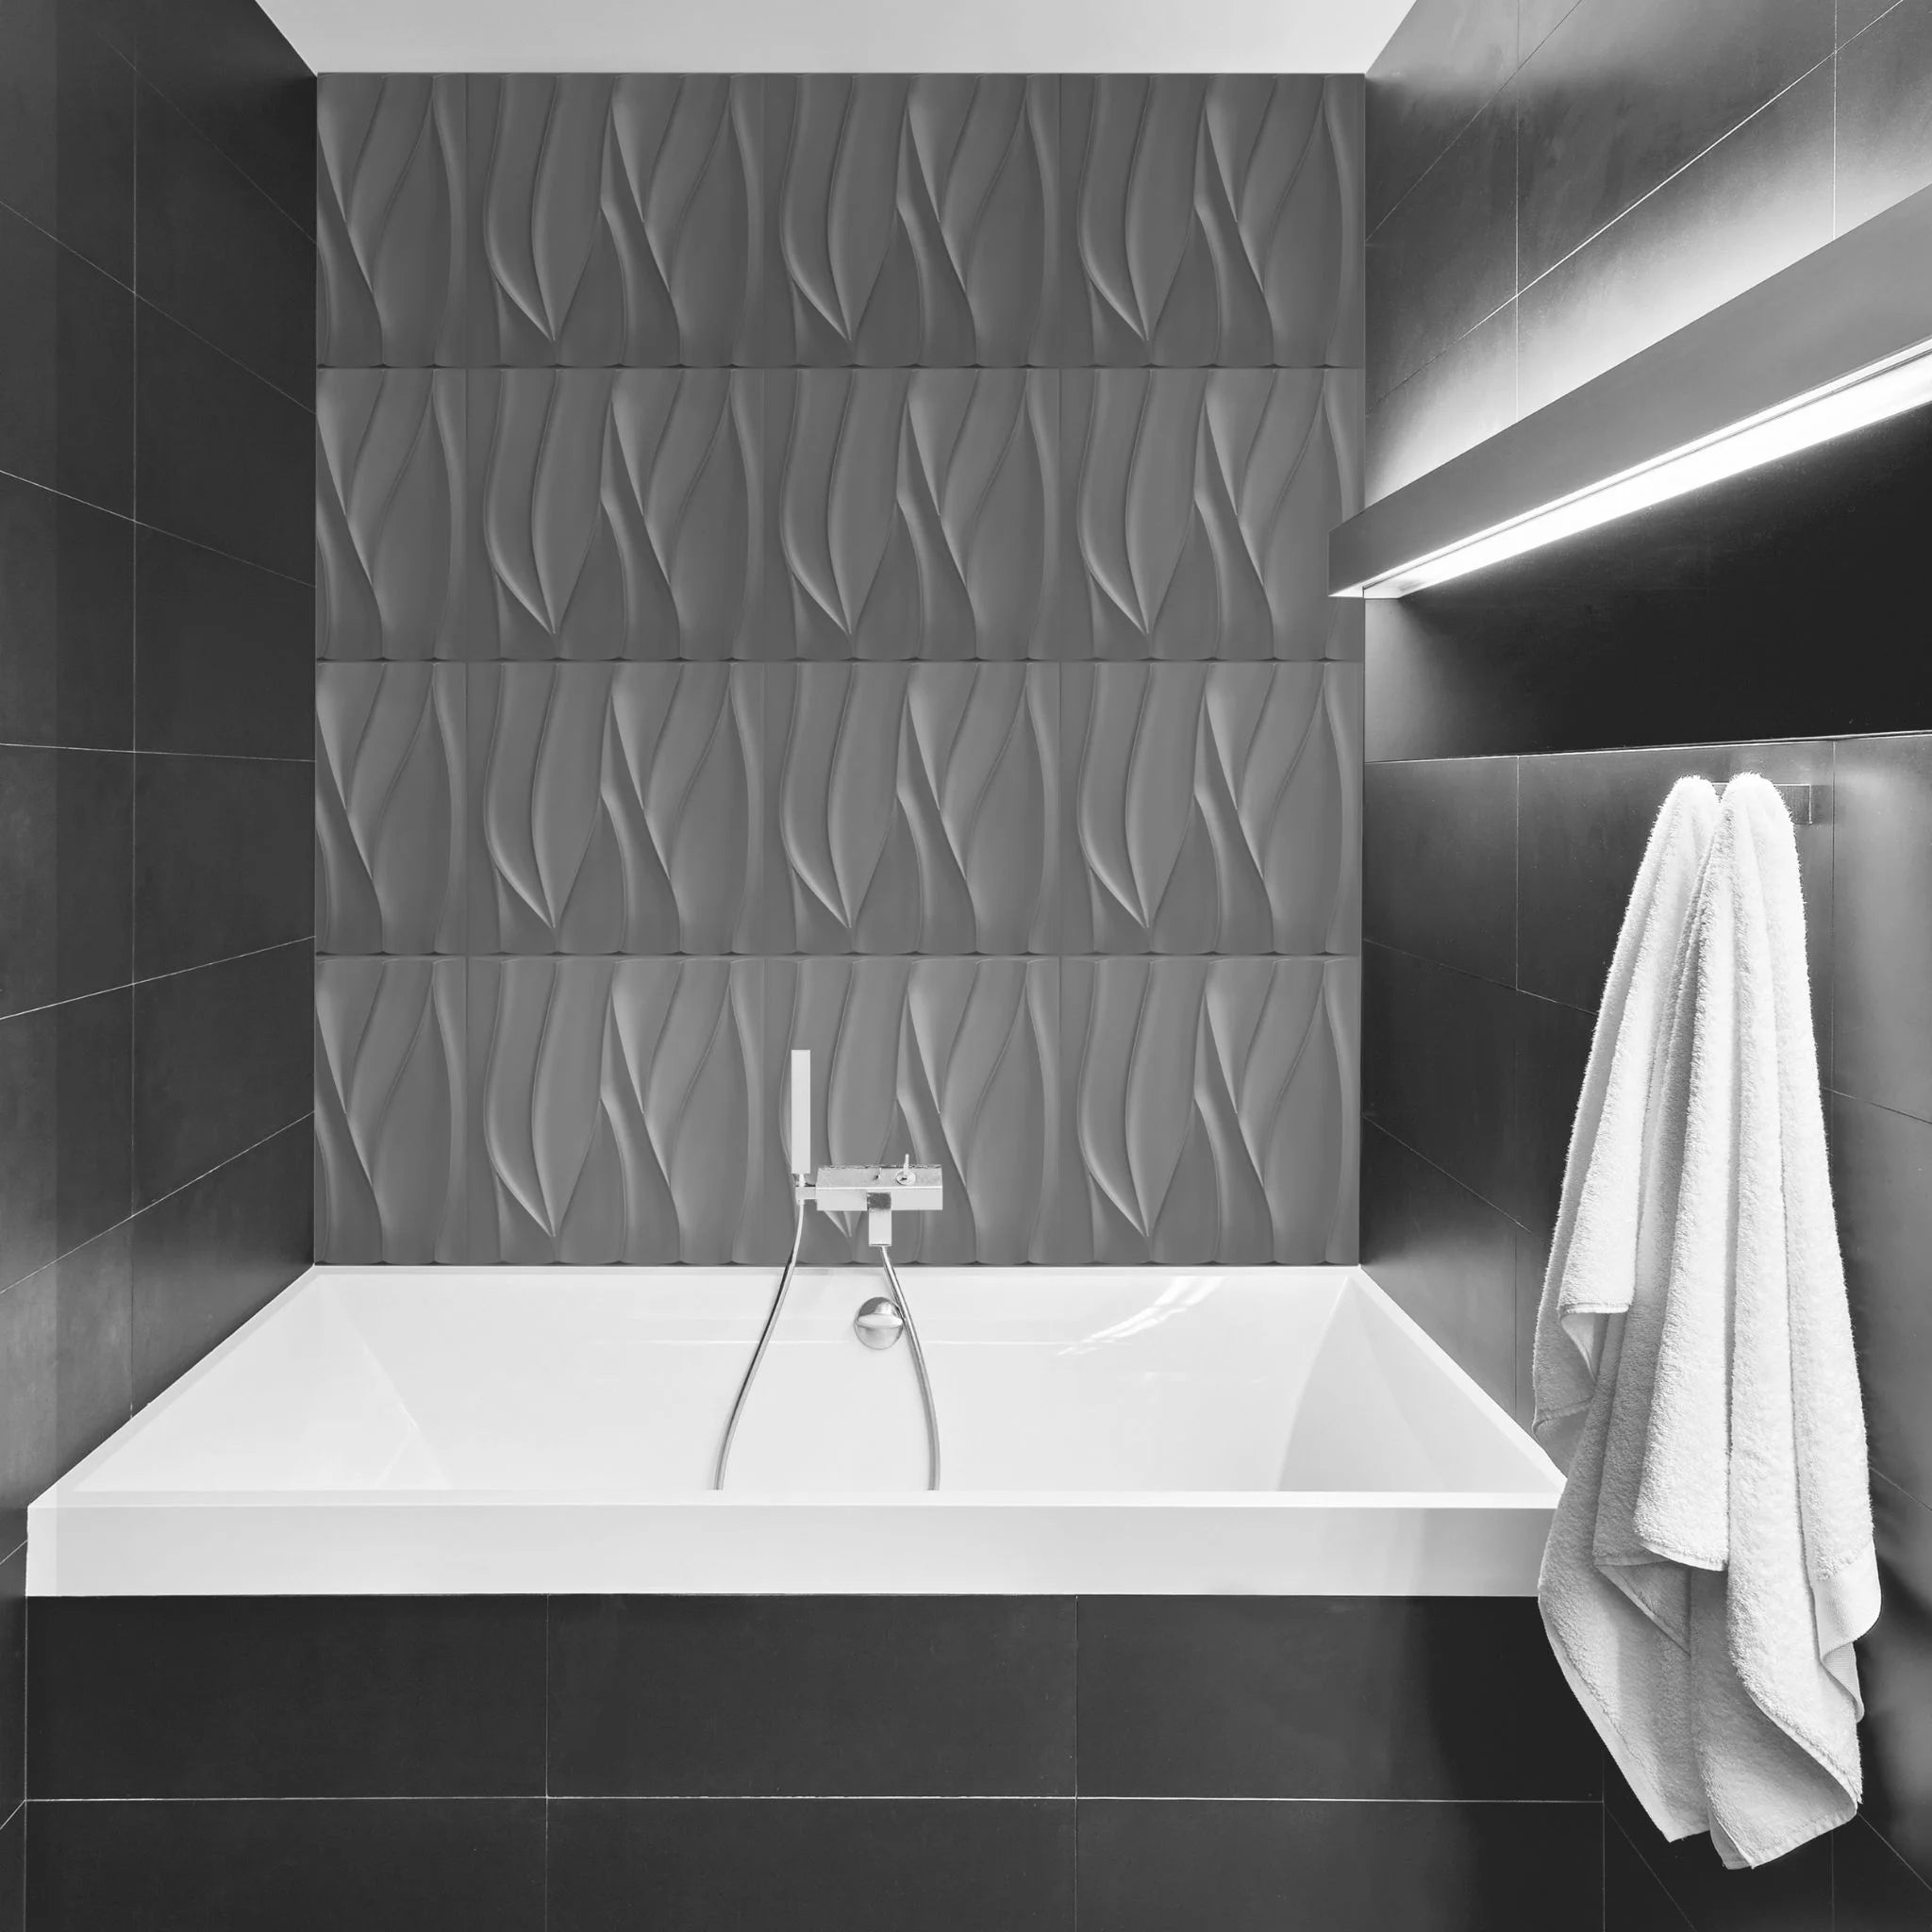 Bathroom with silver wavy-patterned PVC wall panels and modern furniture